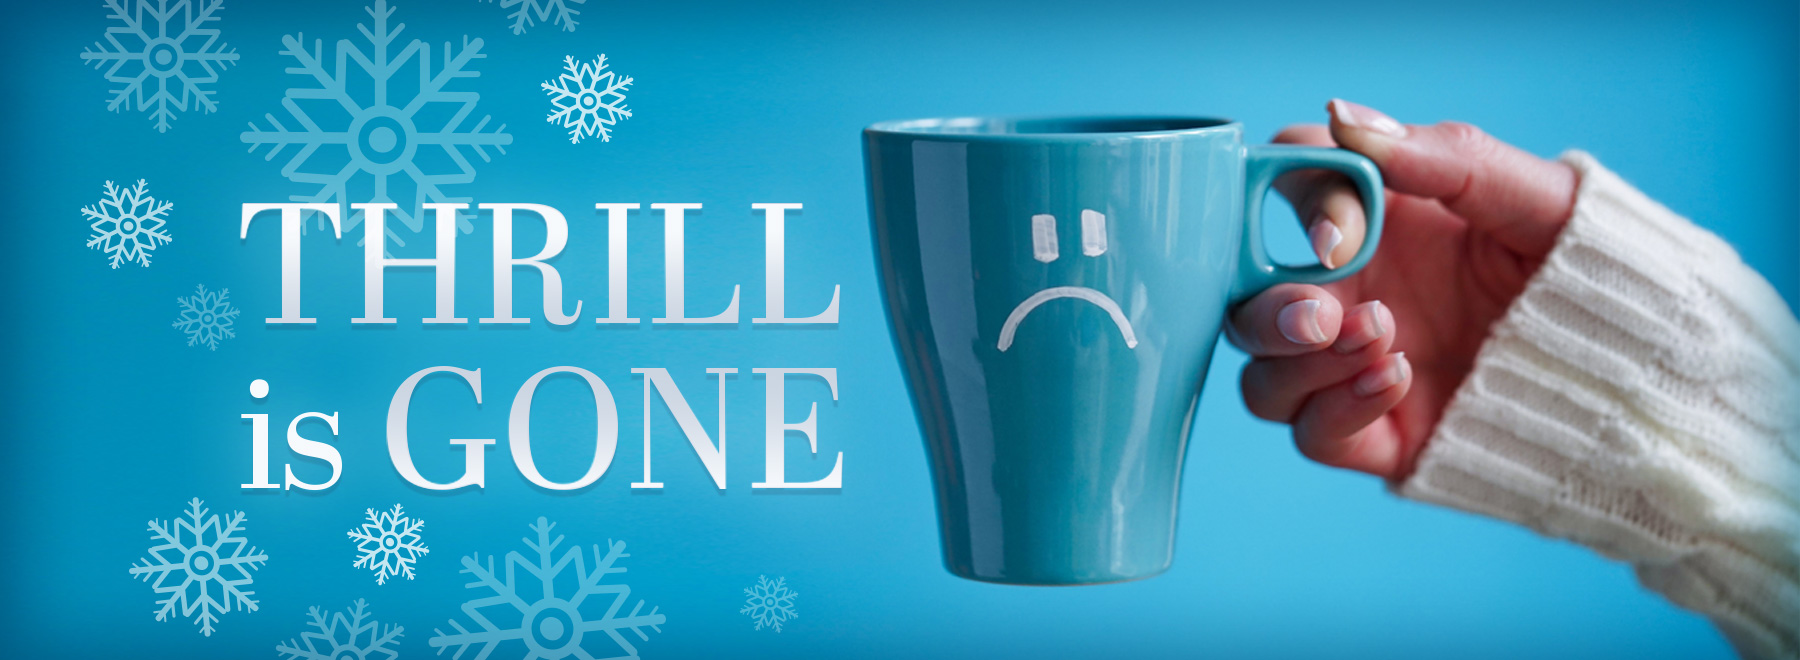 Hand holding a blue mug with frowny face